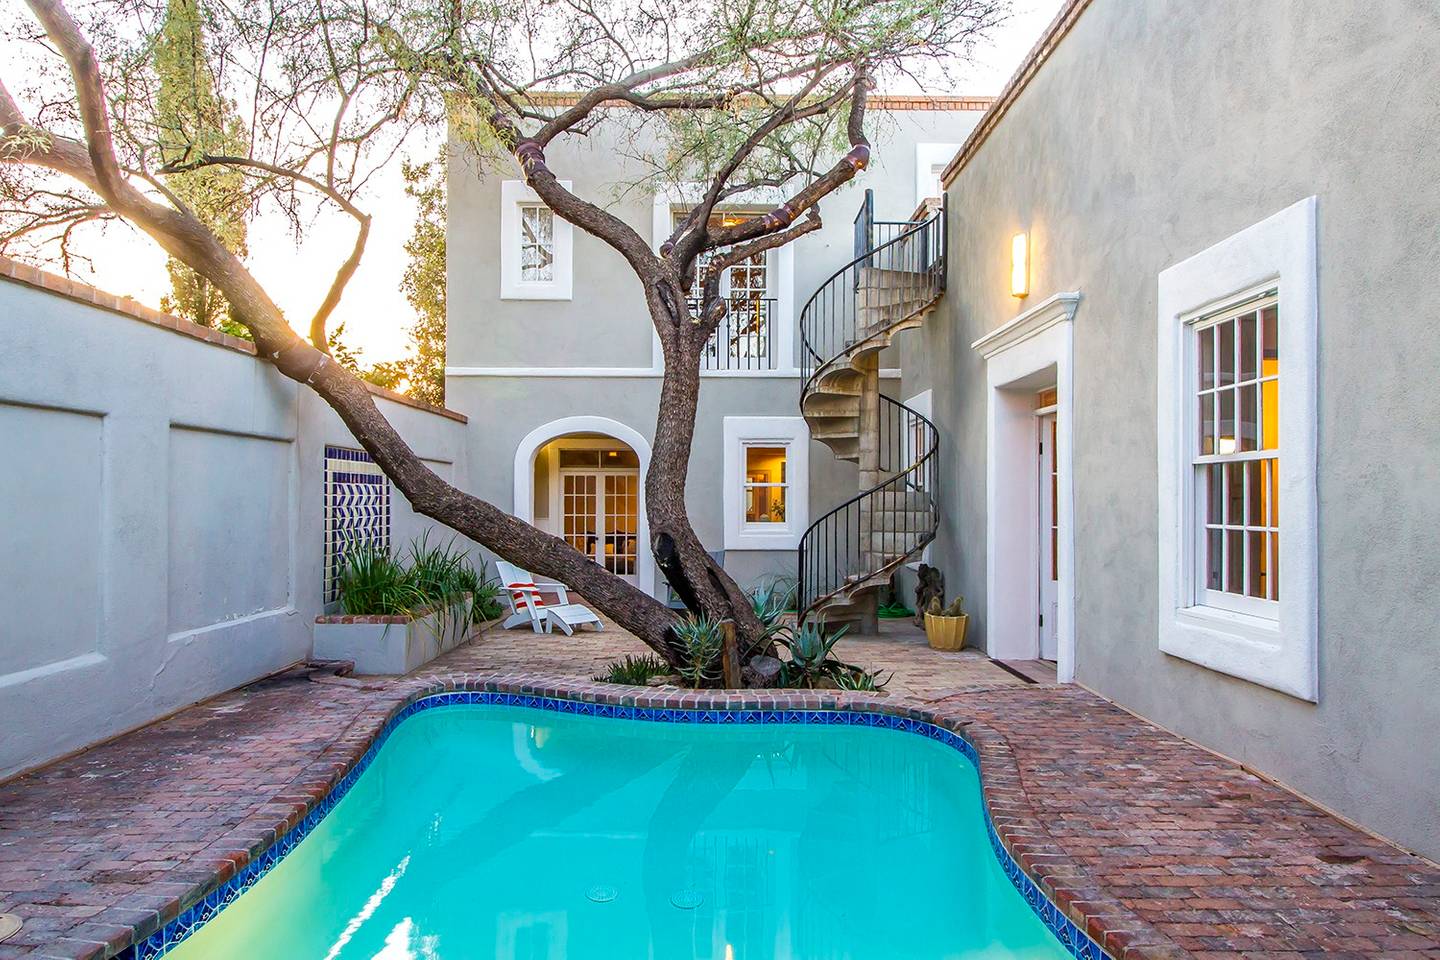 tucson airbnb home with courtyard pool 